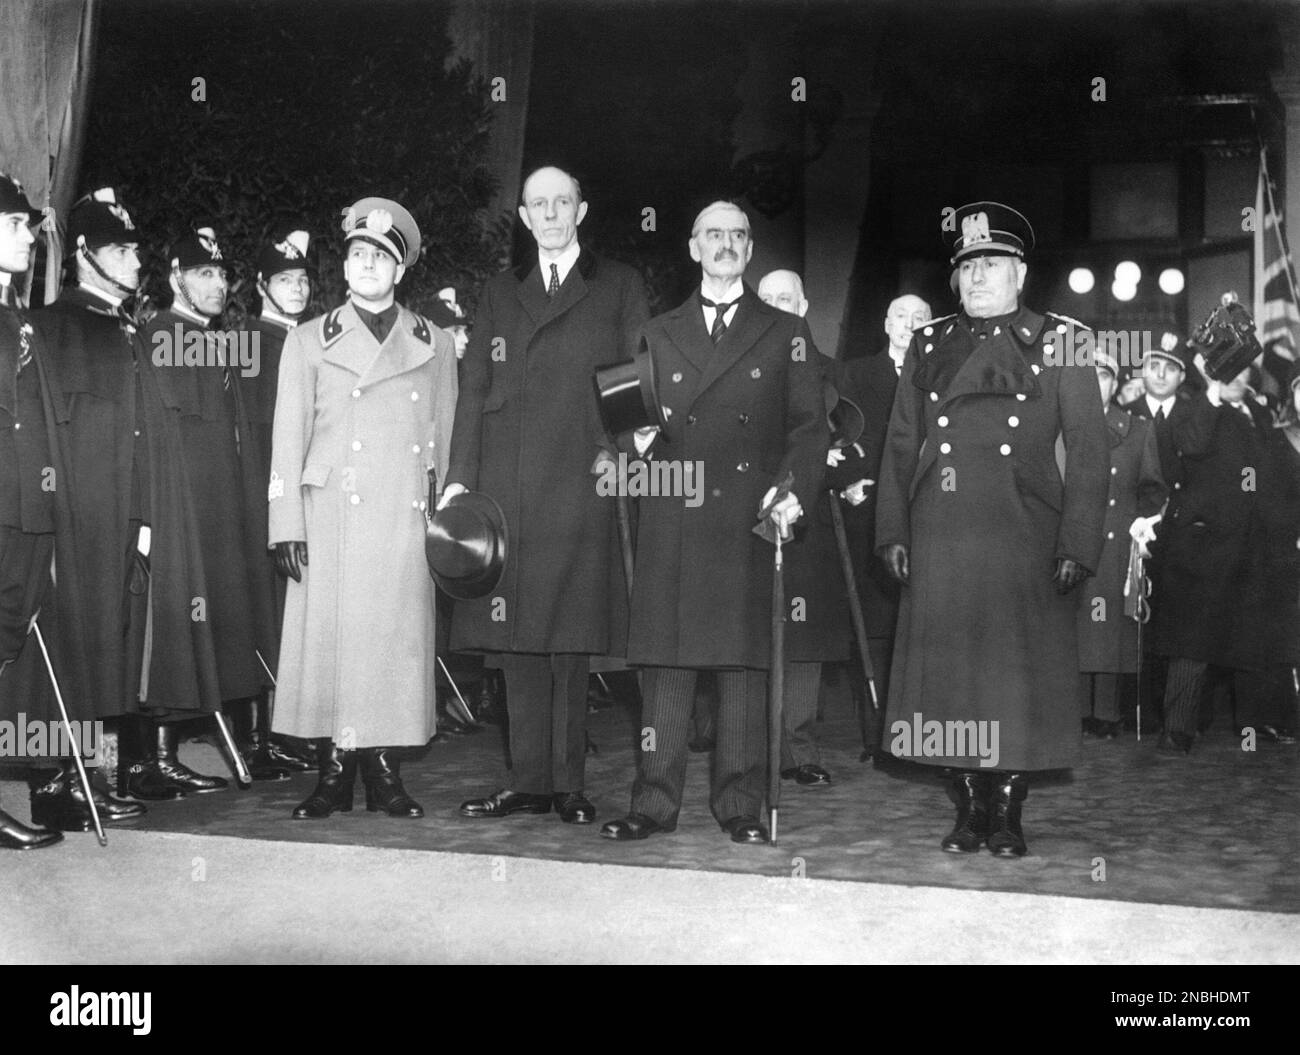 The meeting between British Prime Minister Neville Chamberlain and Italian dictator Benito Mussolini in Rome on Nov. 1, 1939. Left to right are Italian Foreign Minister Count Ciano, British Foreign Minister Lord